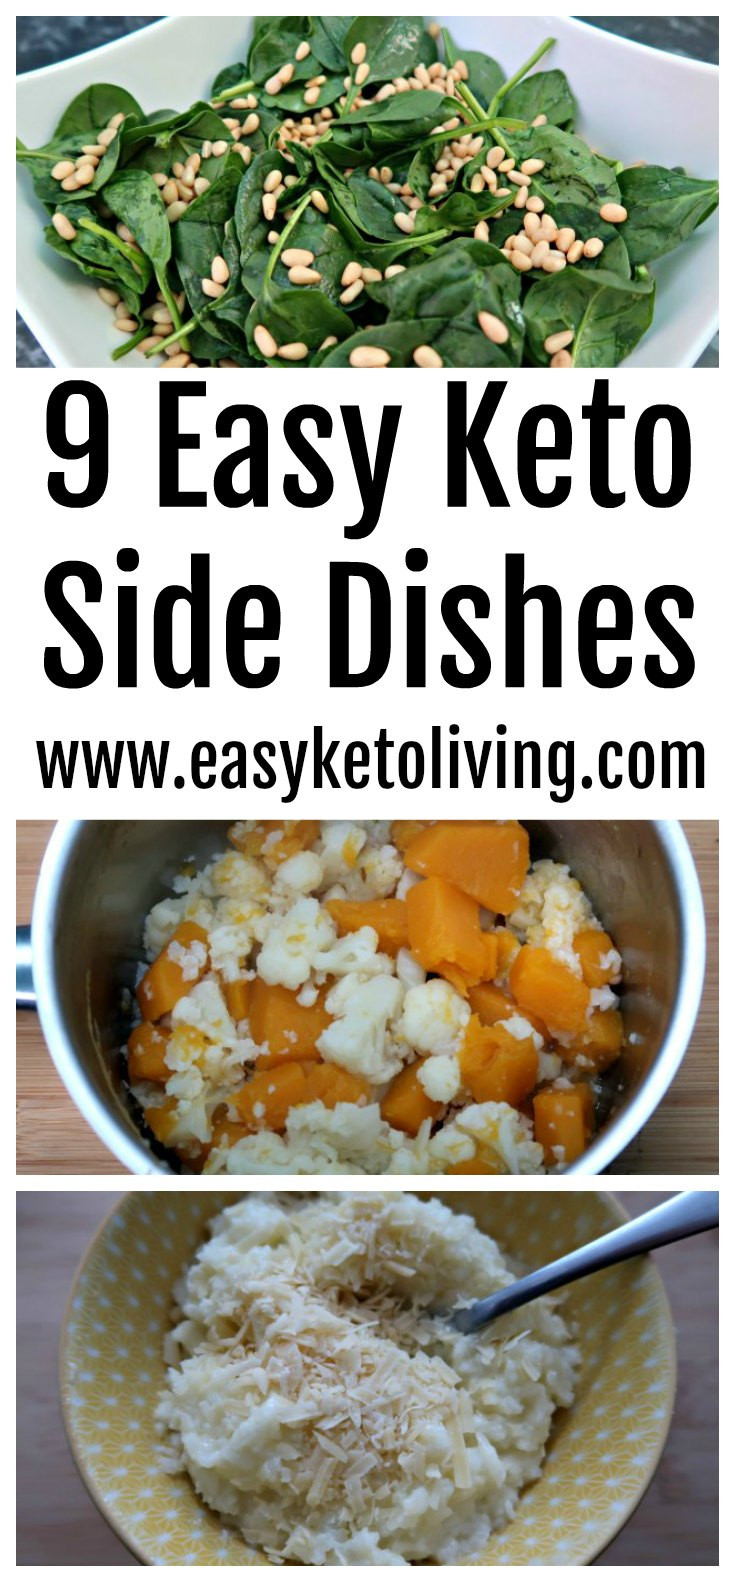 Keto Side Dishes for Chicken Elegant 9 Easy Keto Sides Recipes Low Carb Side Dishes